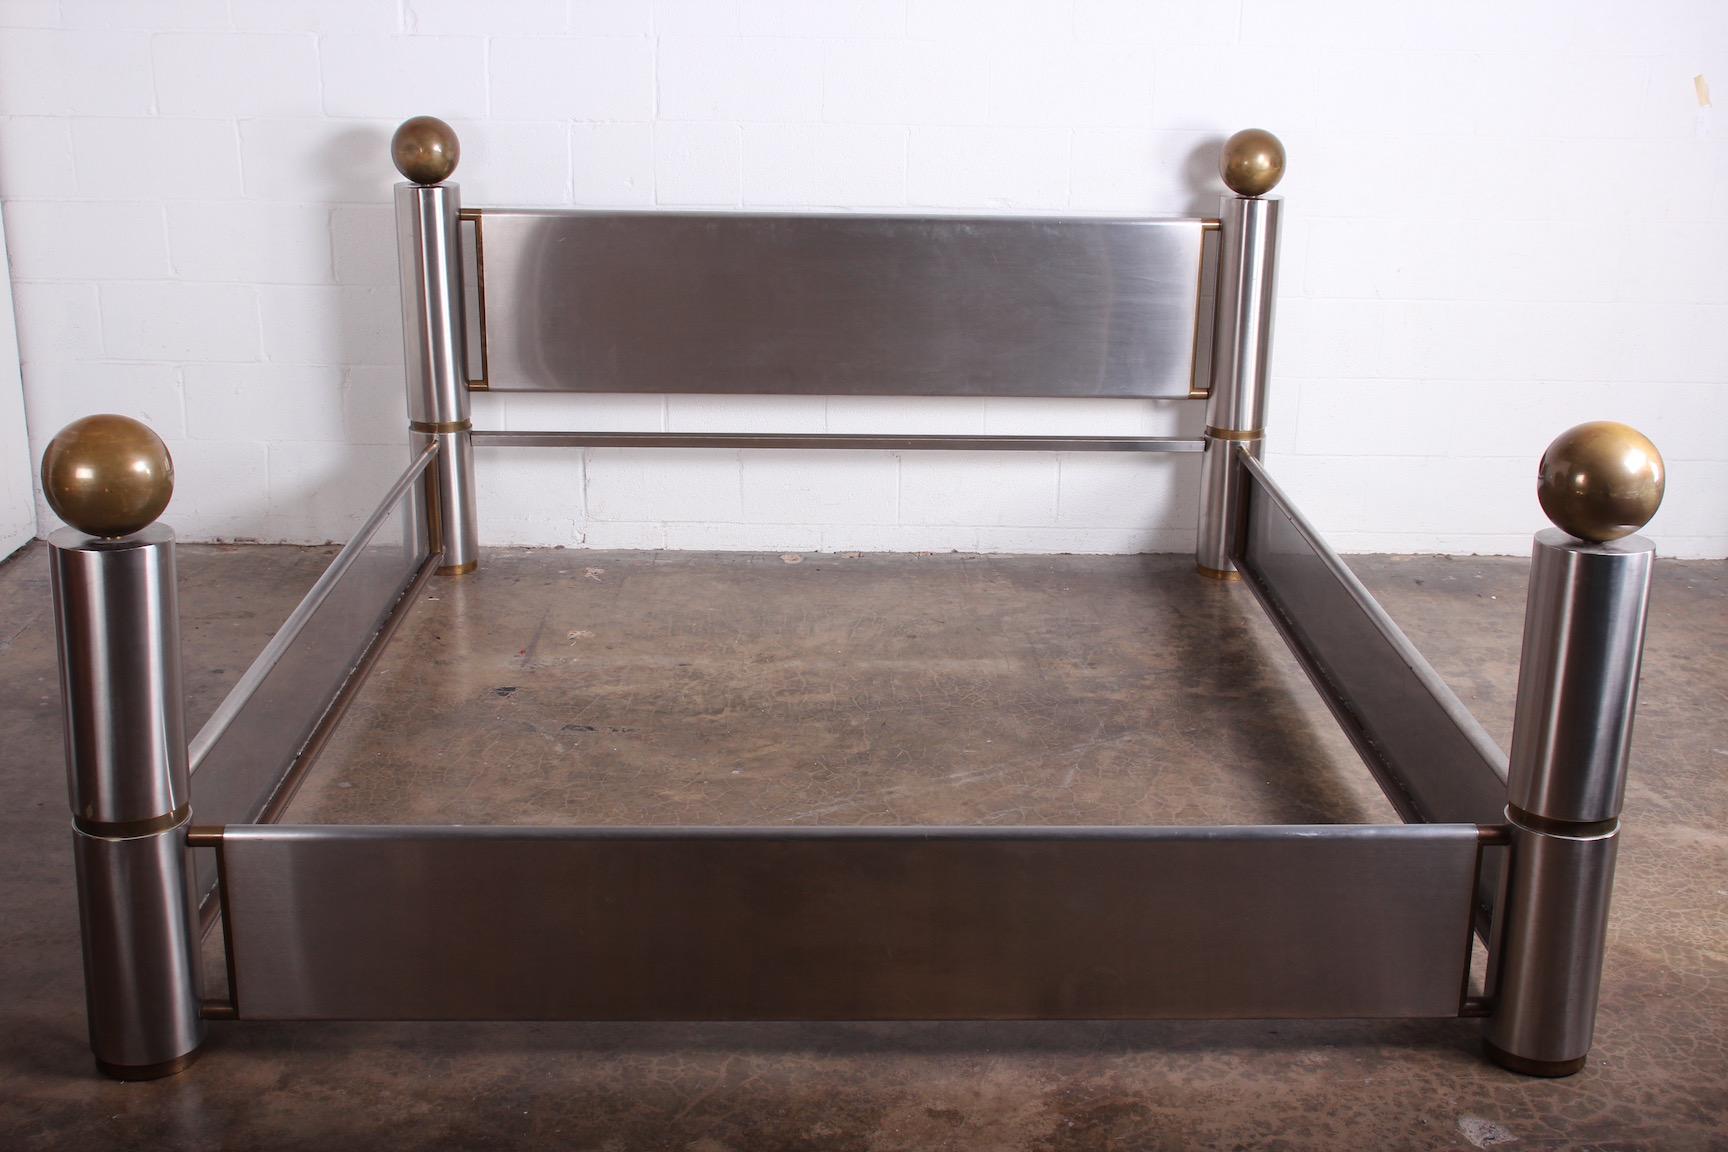 A finally crafted stainless steel and patinated brass California king size bed, 1980's.
Interior measurements: 72